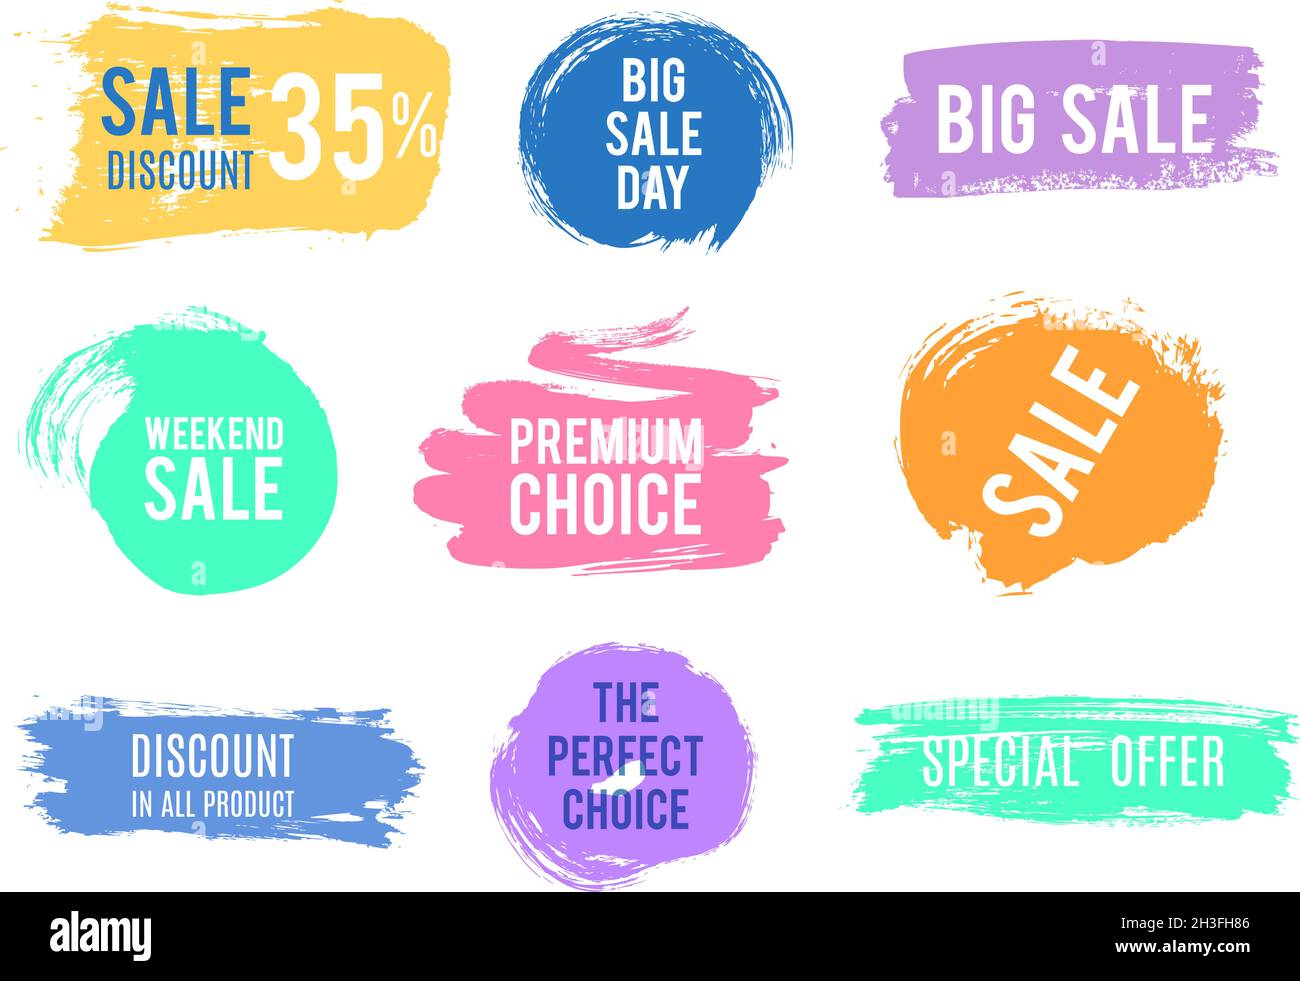 Grunge discount sale badges. Special offer banners, brush textured labels. Isolated promotional vector elements Stock Vector